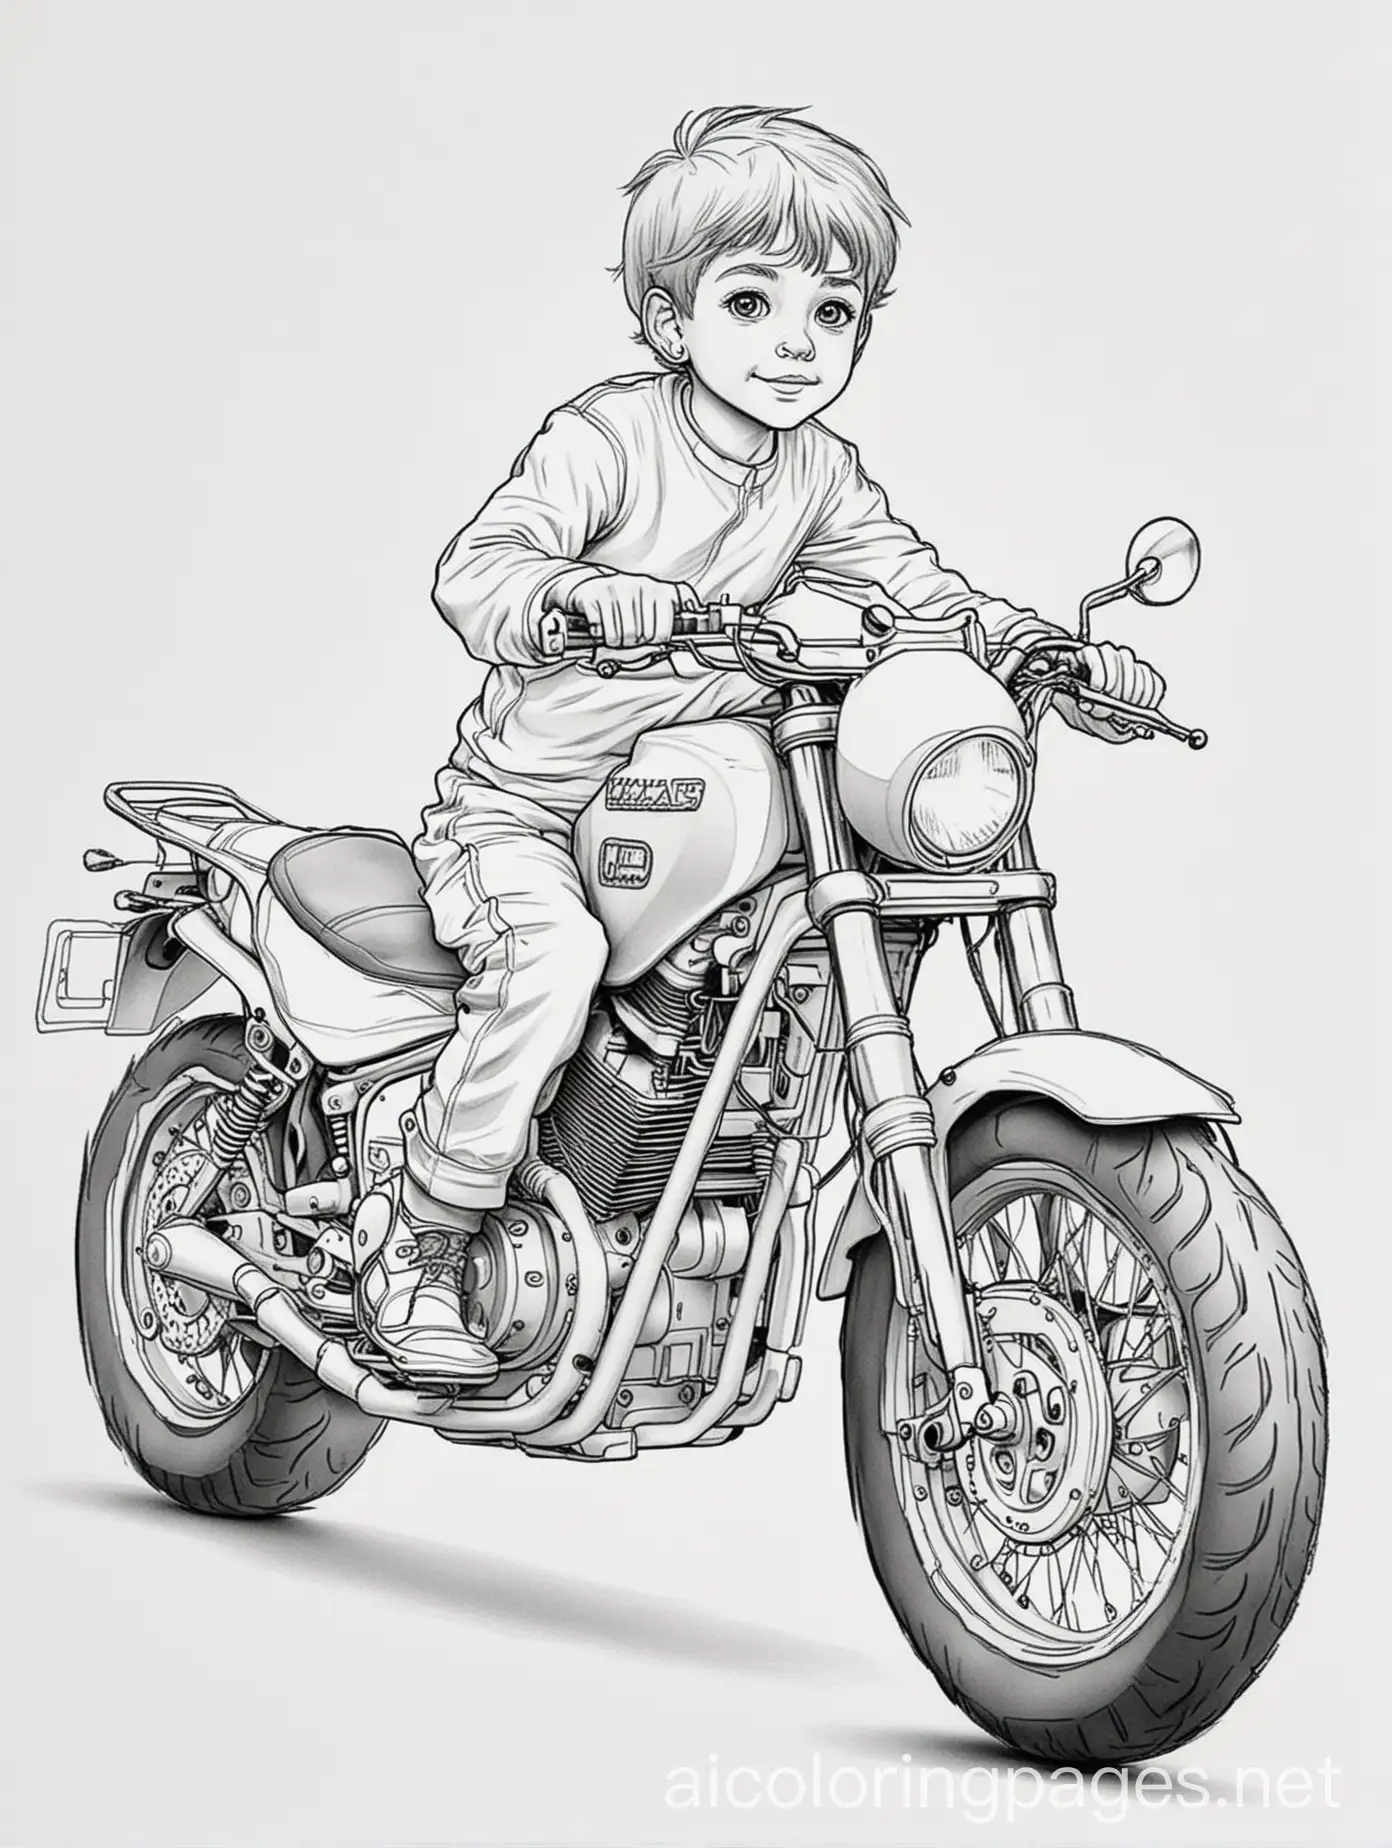 Young man on a motorcycle, coloring page, black and white, line art, white background, simplicity, wide white space. The background of the coloring page is plain white to make it easier for young children to color within the lines. The outlines of all the themes are easy to distinguish, making it easy for children to color them without much difficulty, Coloring Page, black and white, line art, white background, Simplicity, Ample White Space. The background of the coloring page is plain white to make it easy for young children to color within the lines. The outlines of all the subjects are easy to distinguish, making it simple for kids to color without too much difficulty